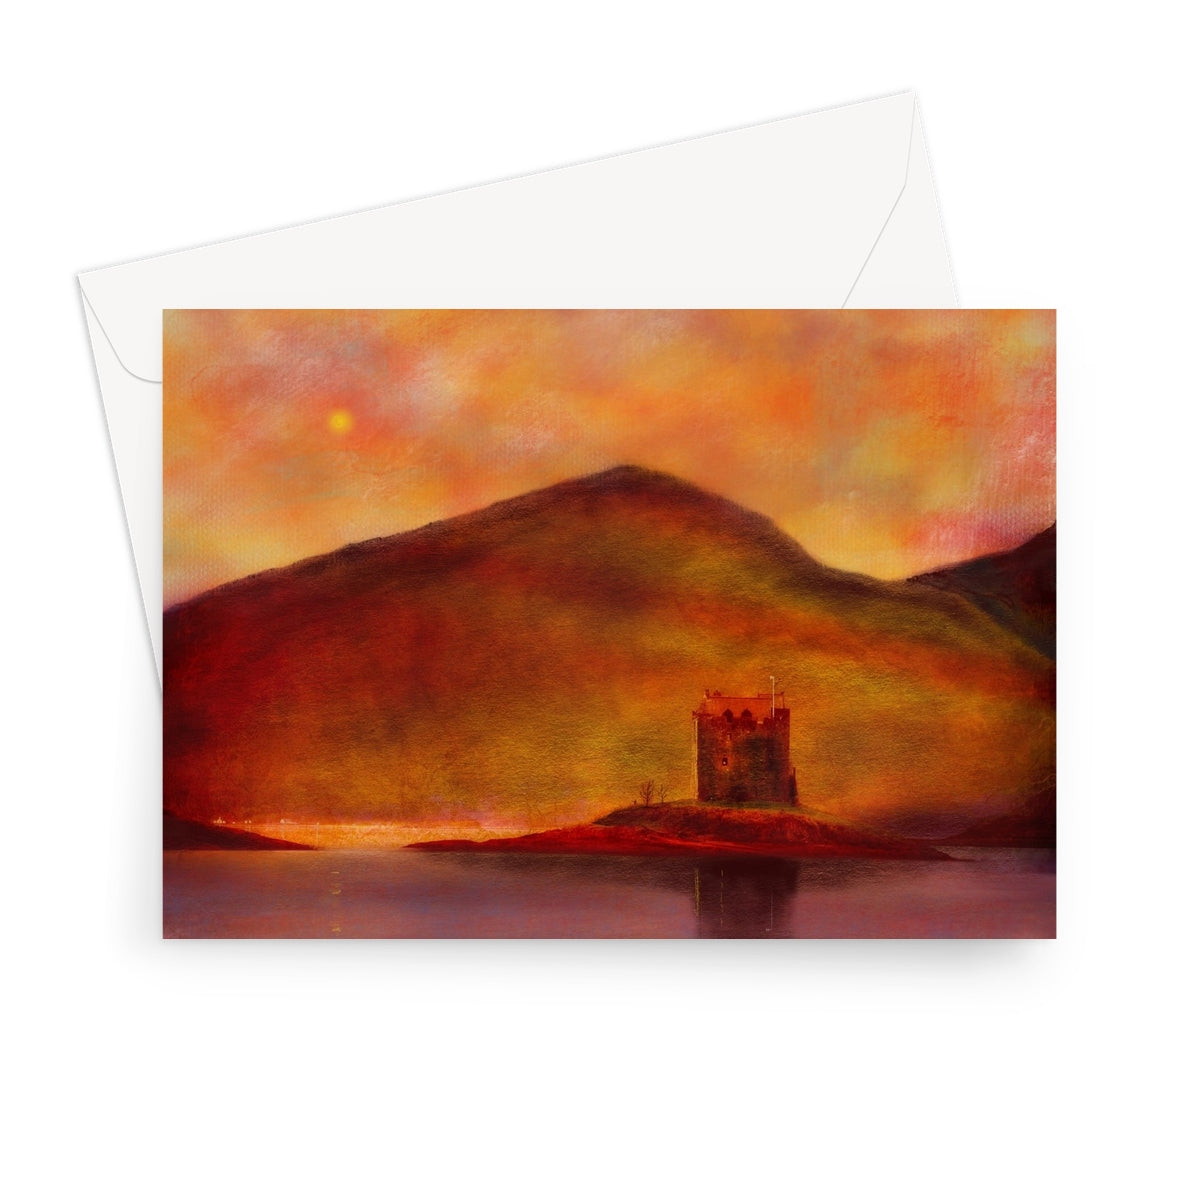 Castle Stalker Sunset Art Gifts Greeting Card-Greetings Cards-Historic & Iconic Scotland Art Gallery-7"x5"-10 Cards-Paintings, Prints, Homeware, Art Gifts From Scotland By Scottish Artist Kevin Hunter